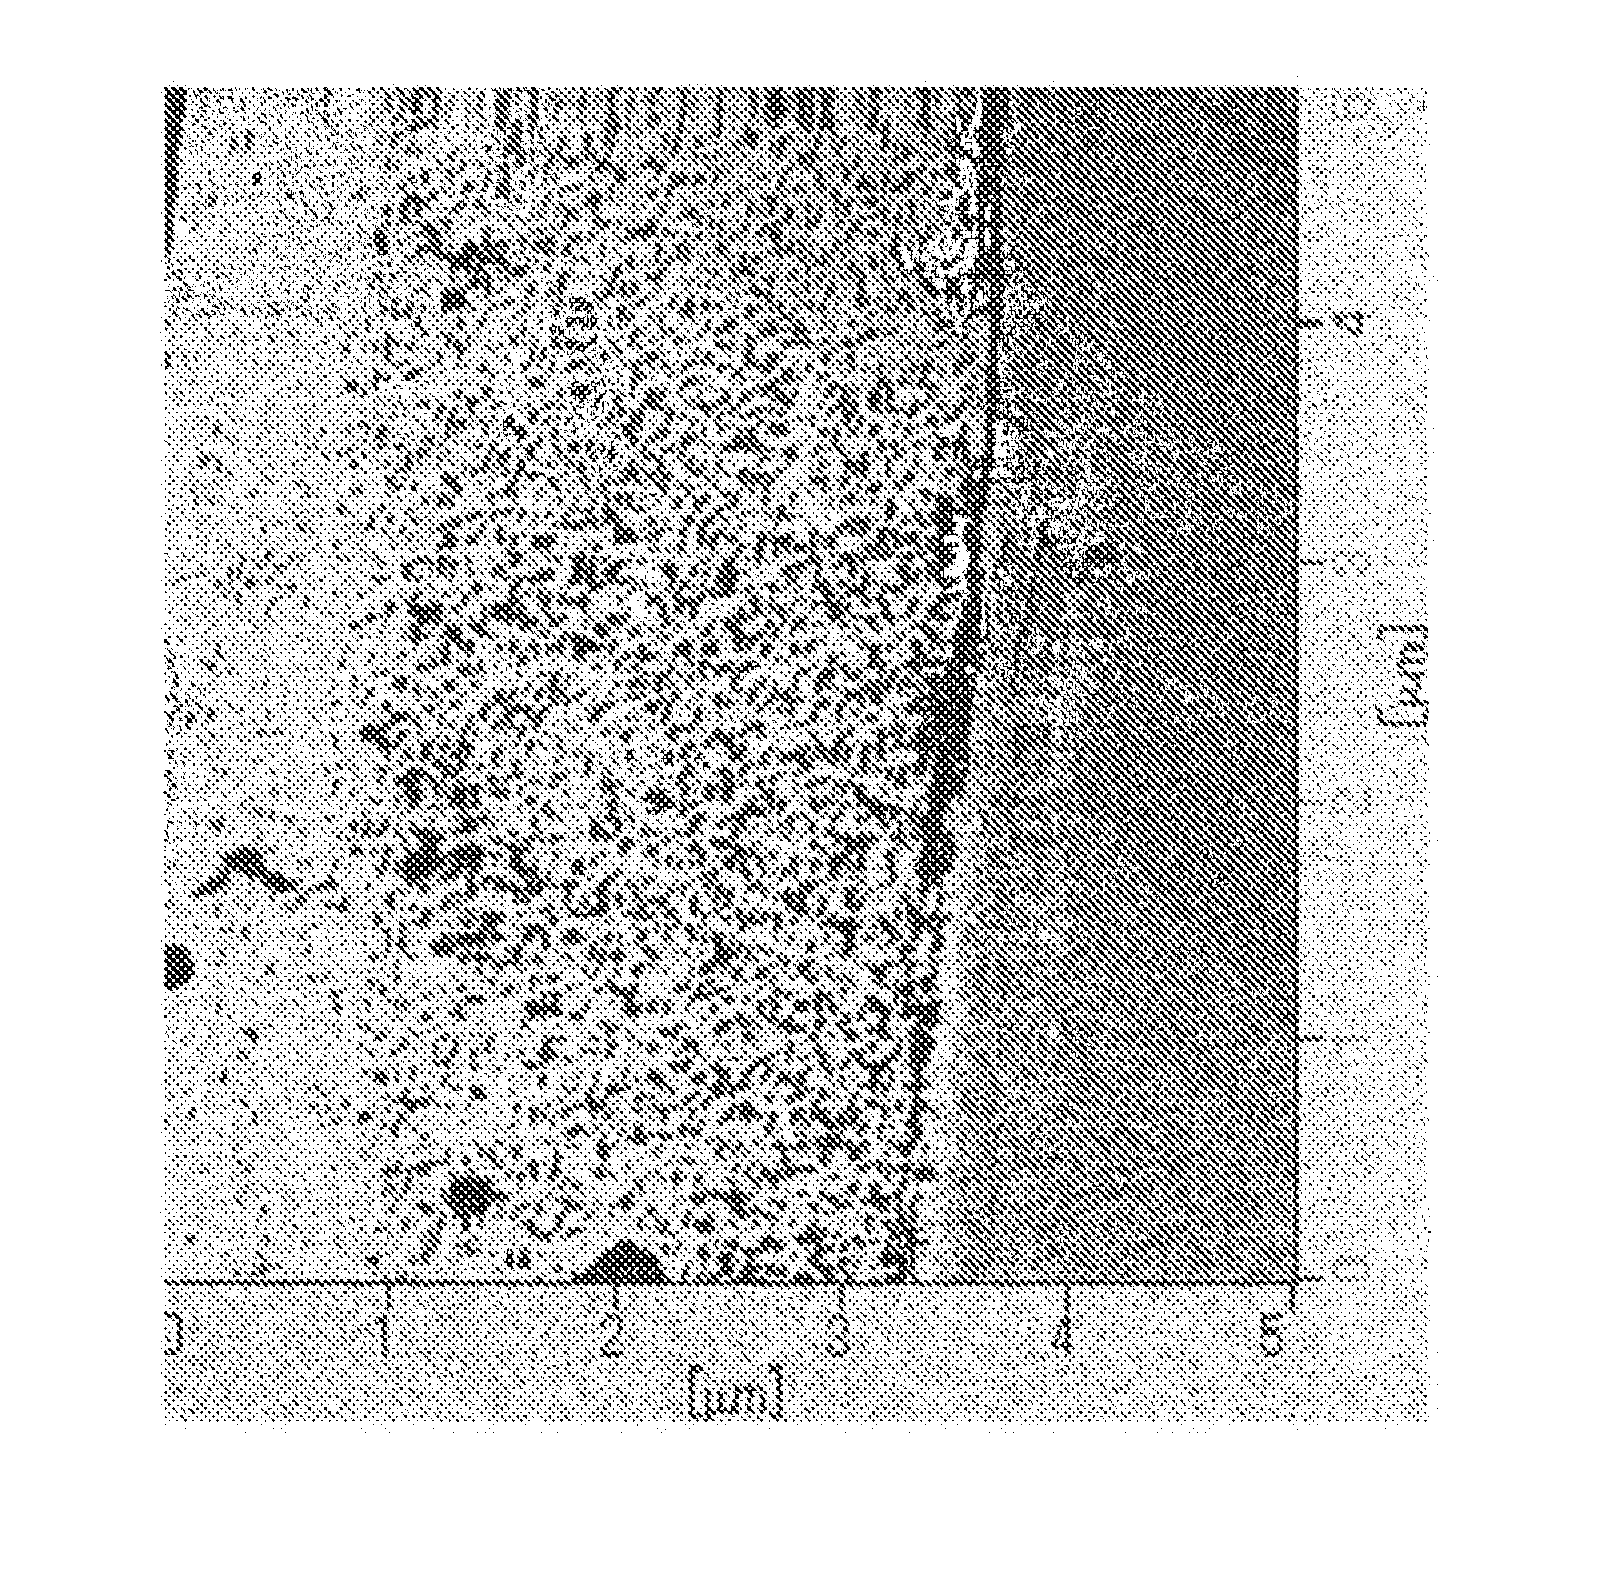 Thermoplastic polymer composition and shaped article composed of the same